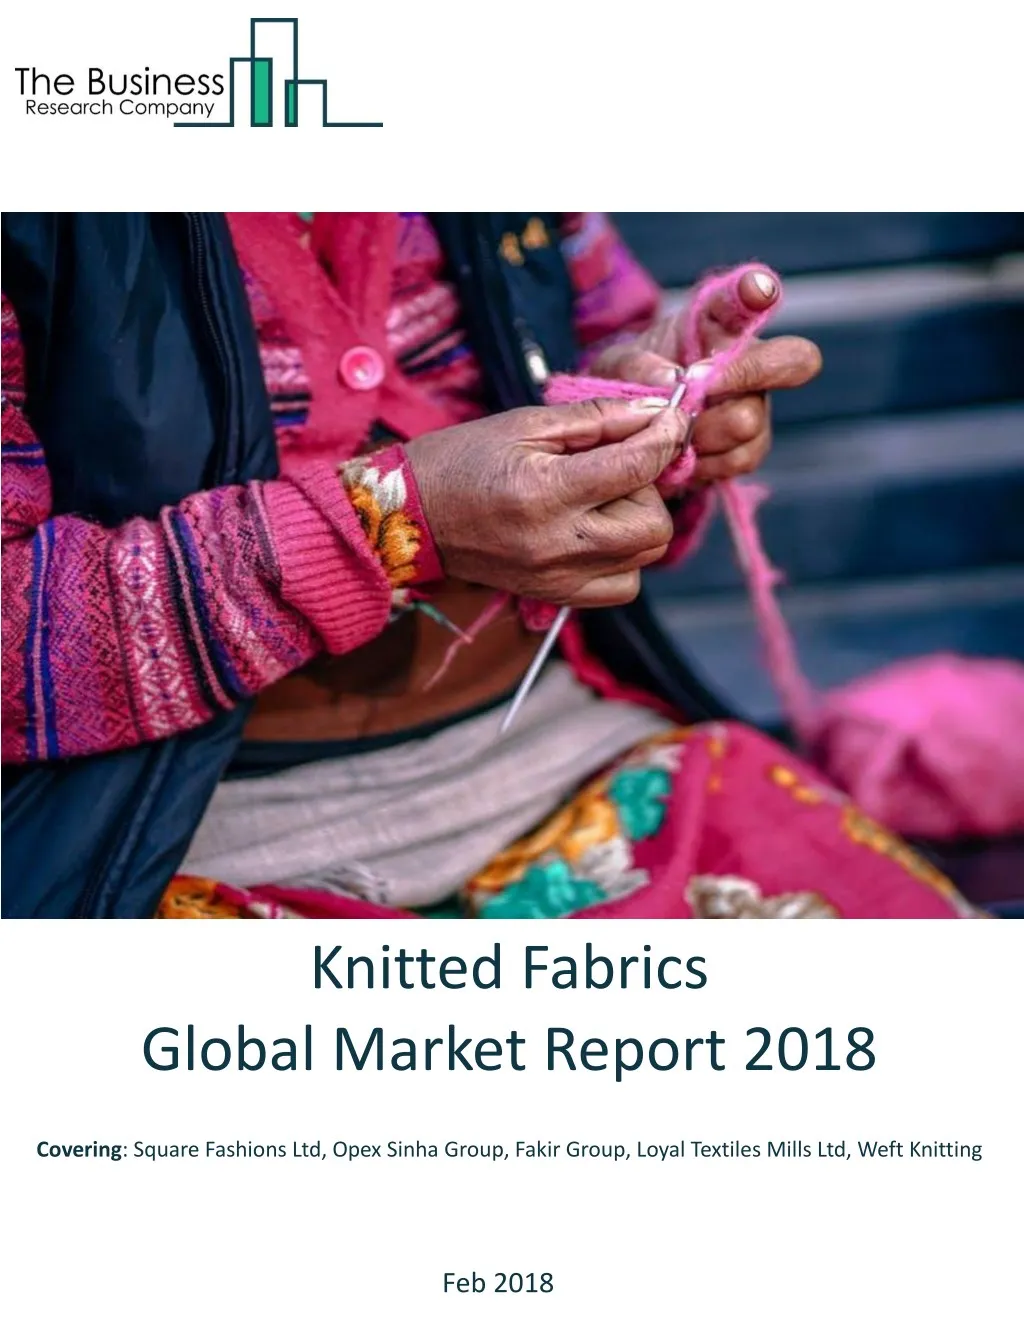 knitted fabrics global market report 2018